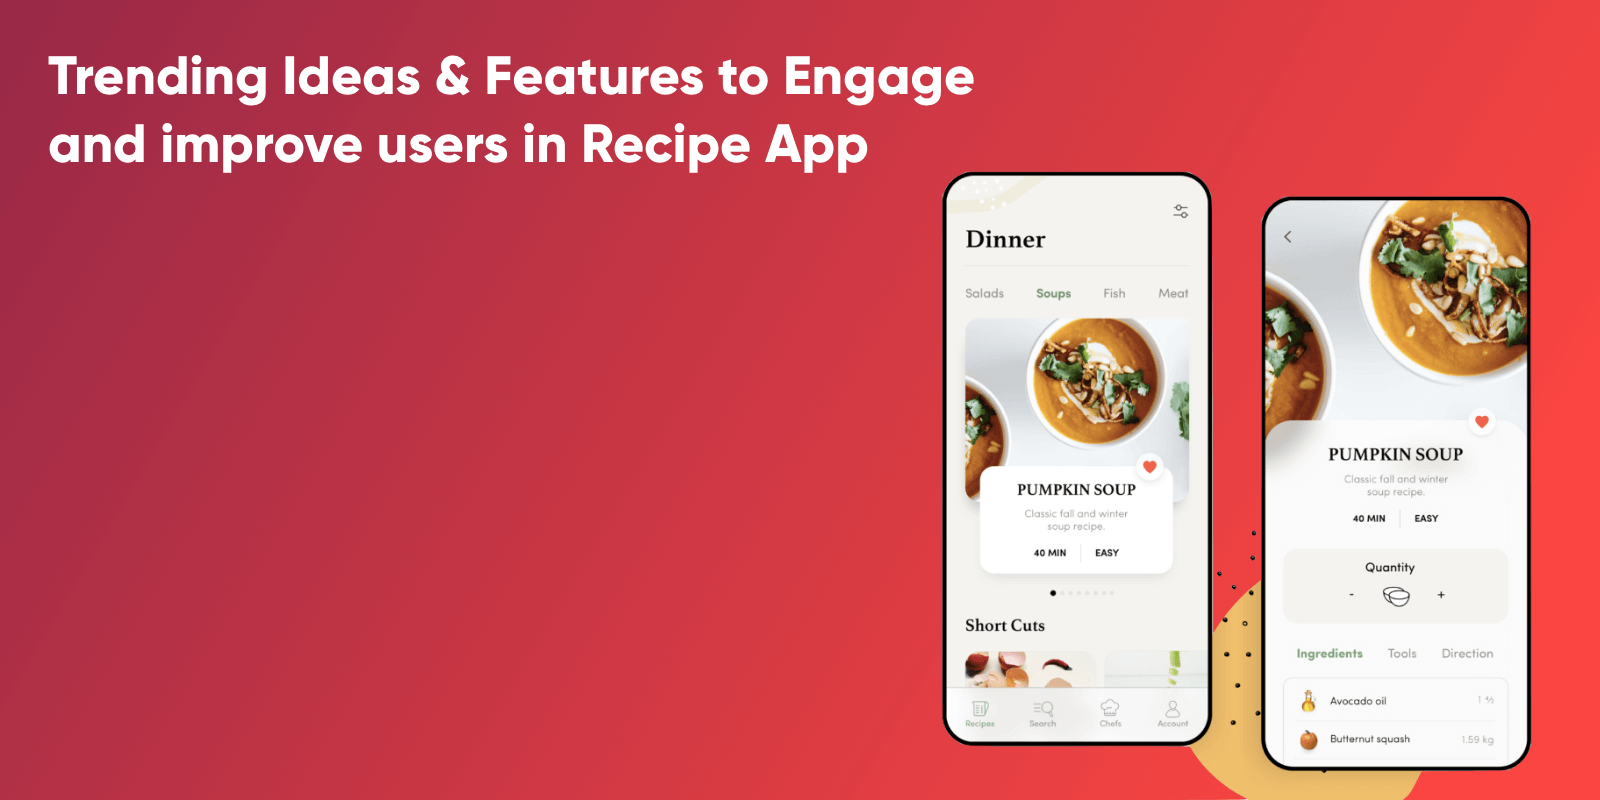 Features Ideas for Food Recipe App